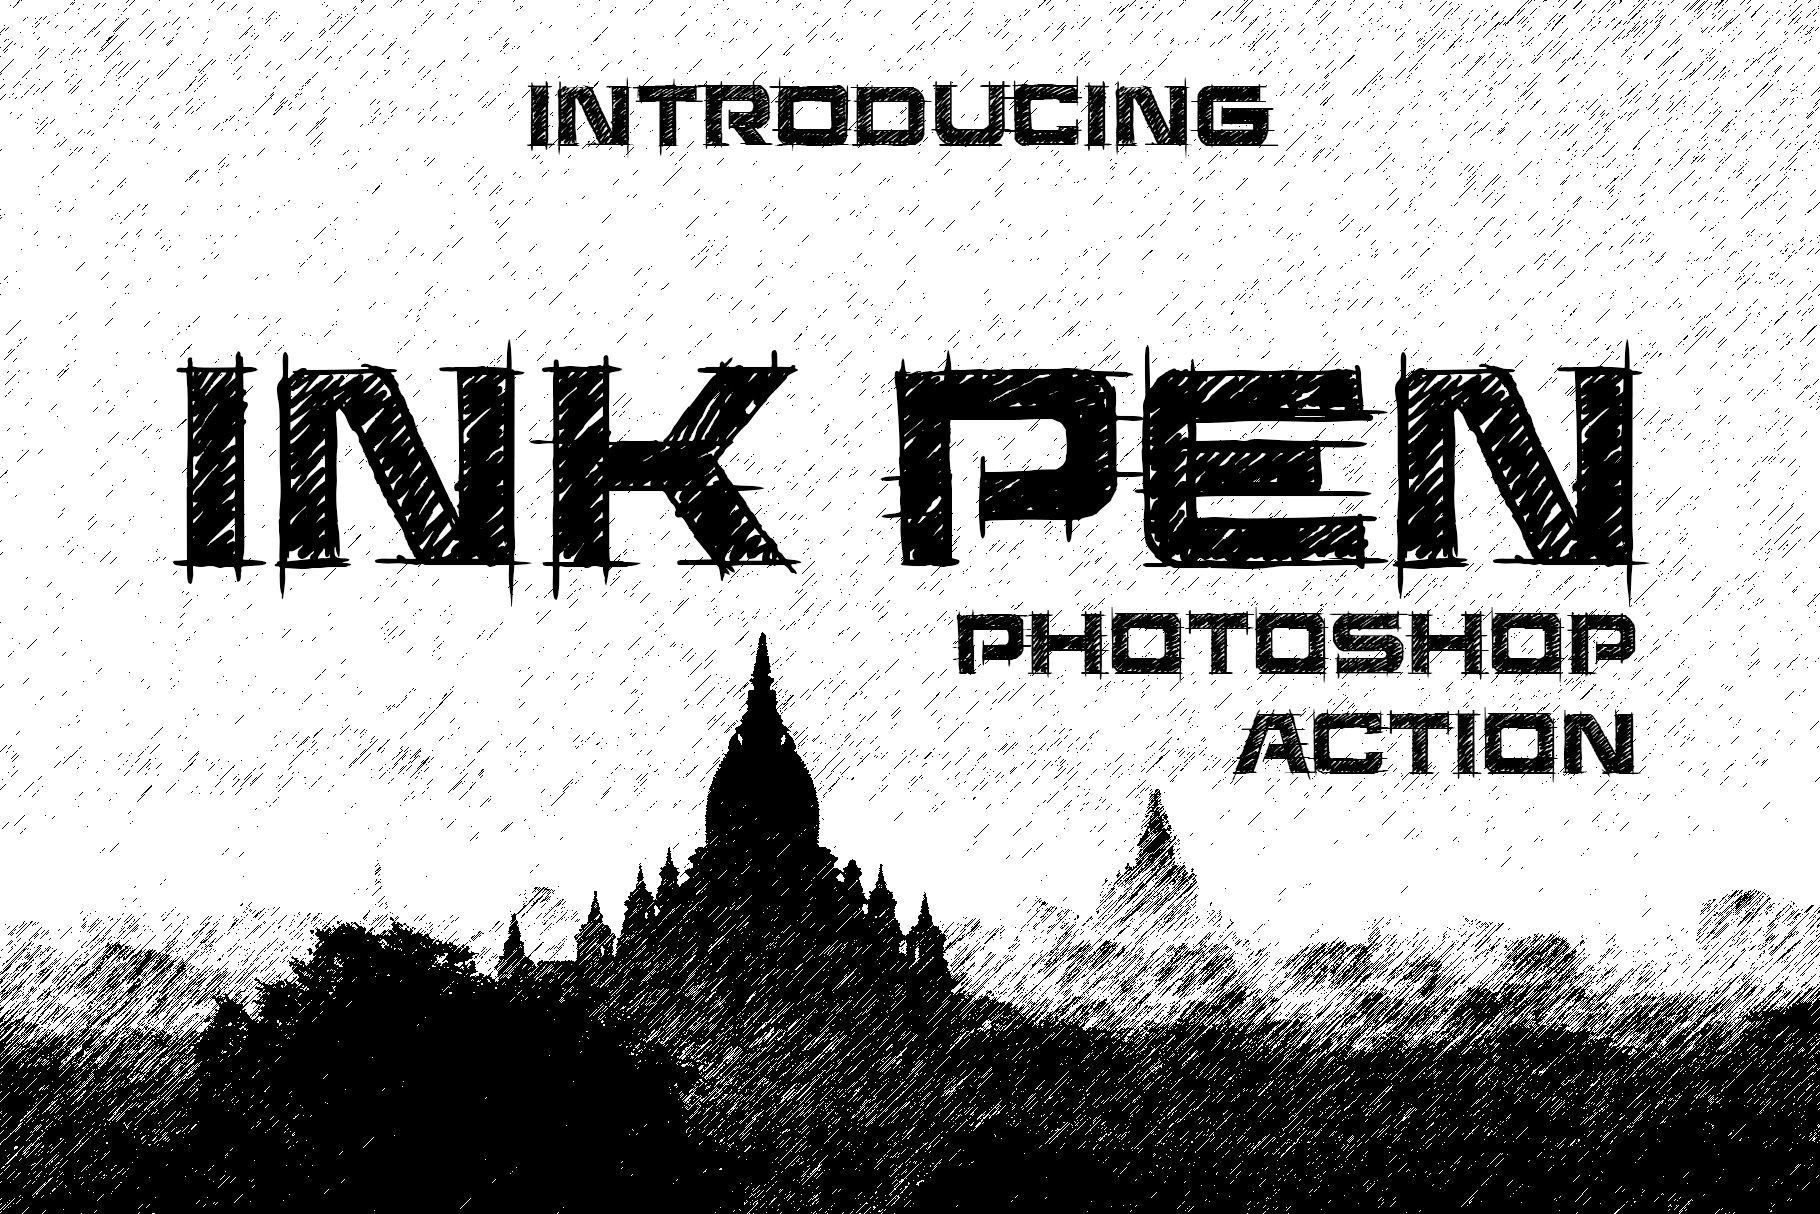 Ink Pen Photoshop Actioncover image.